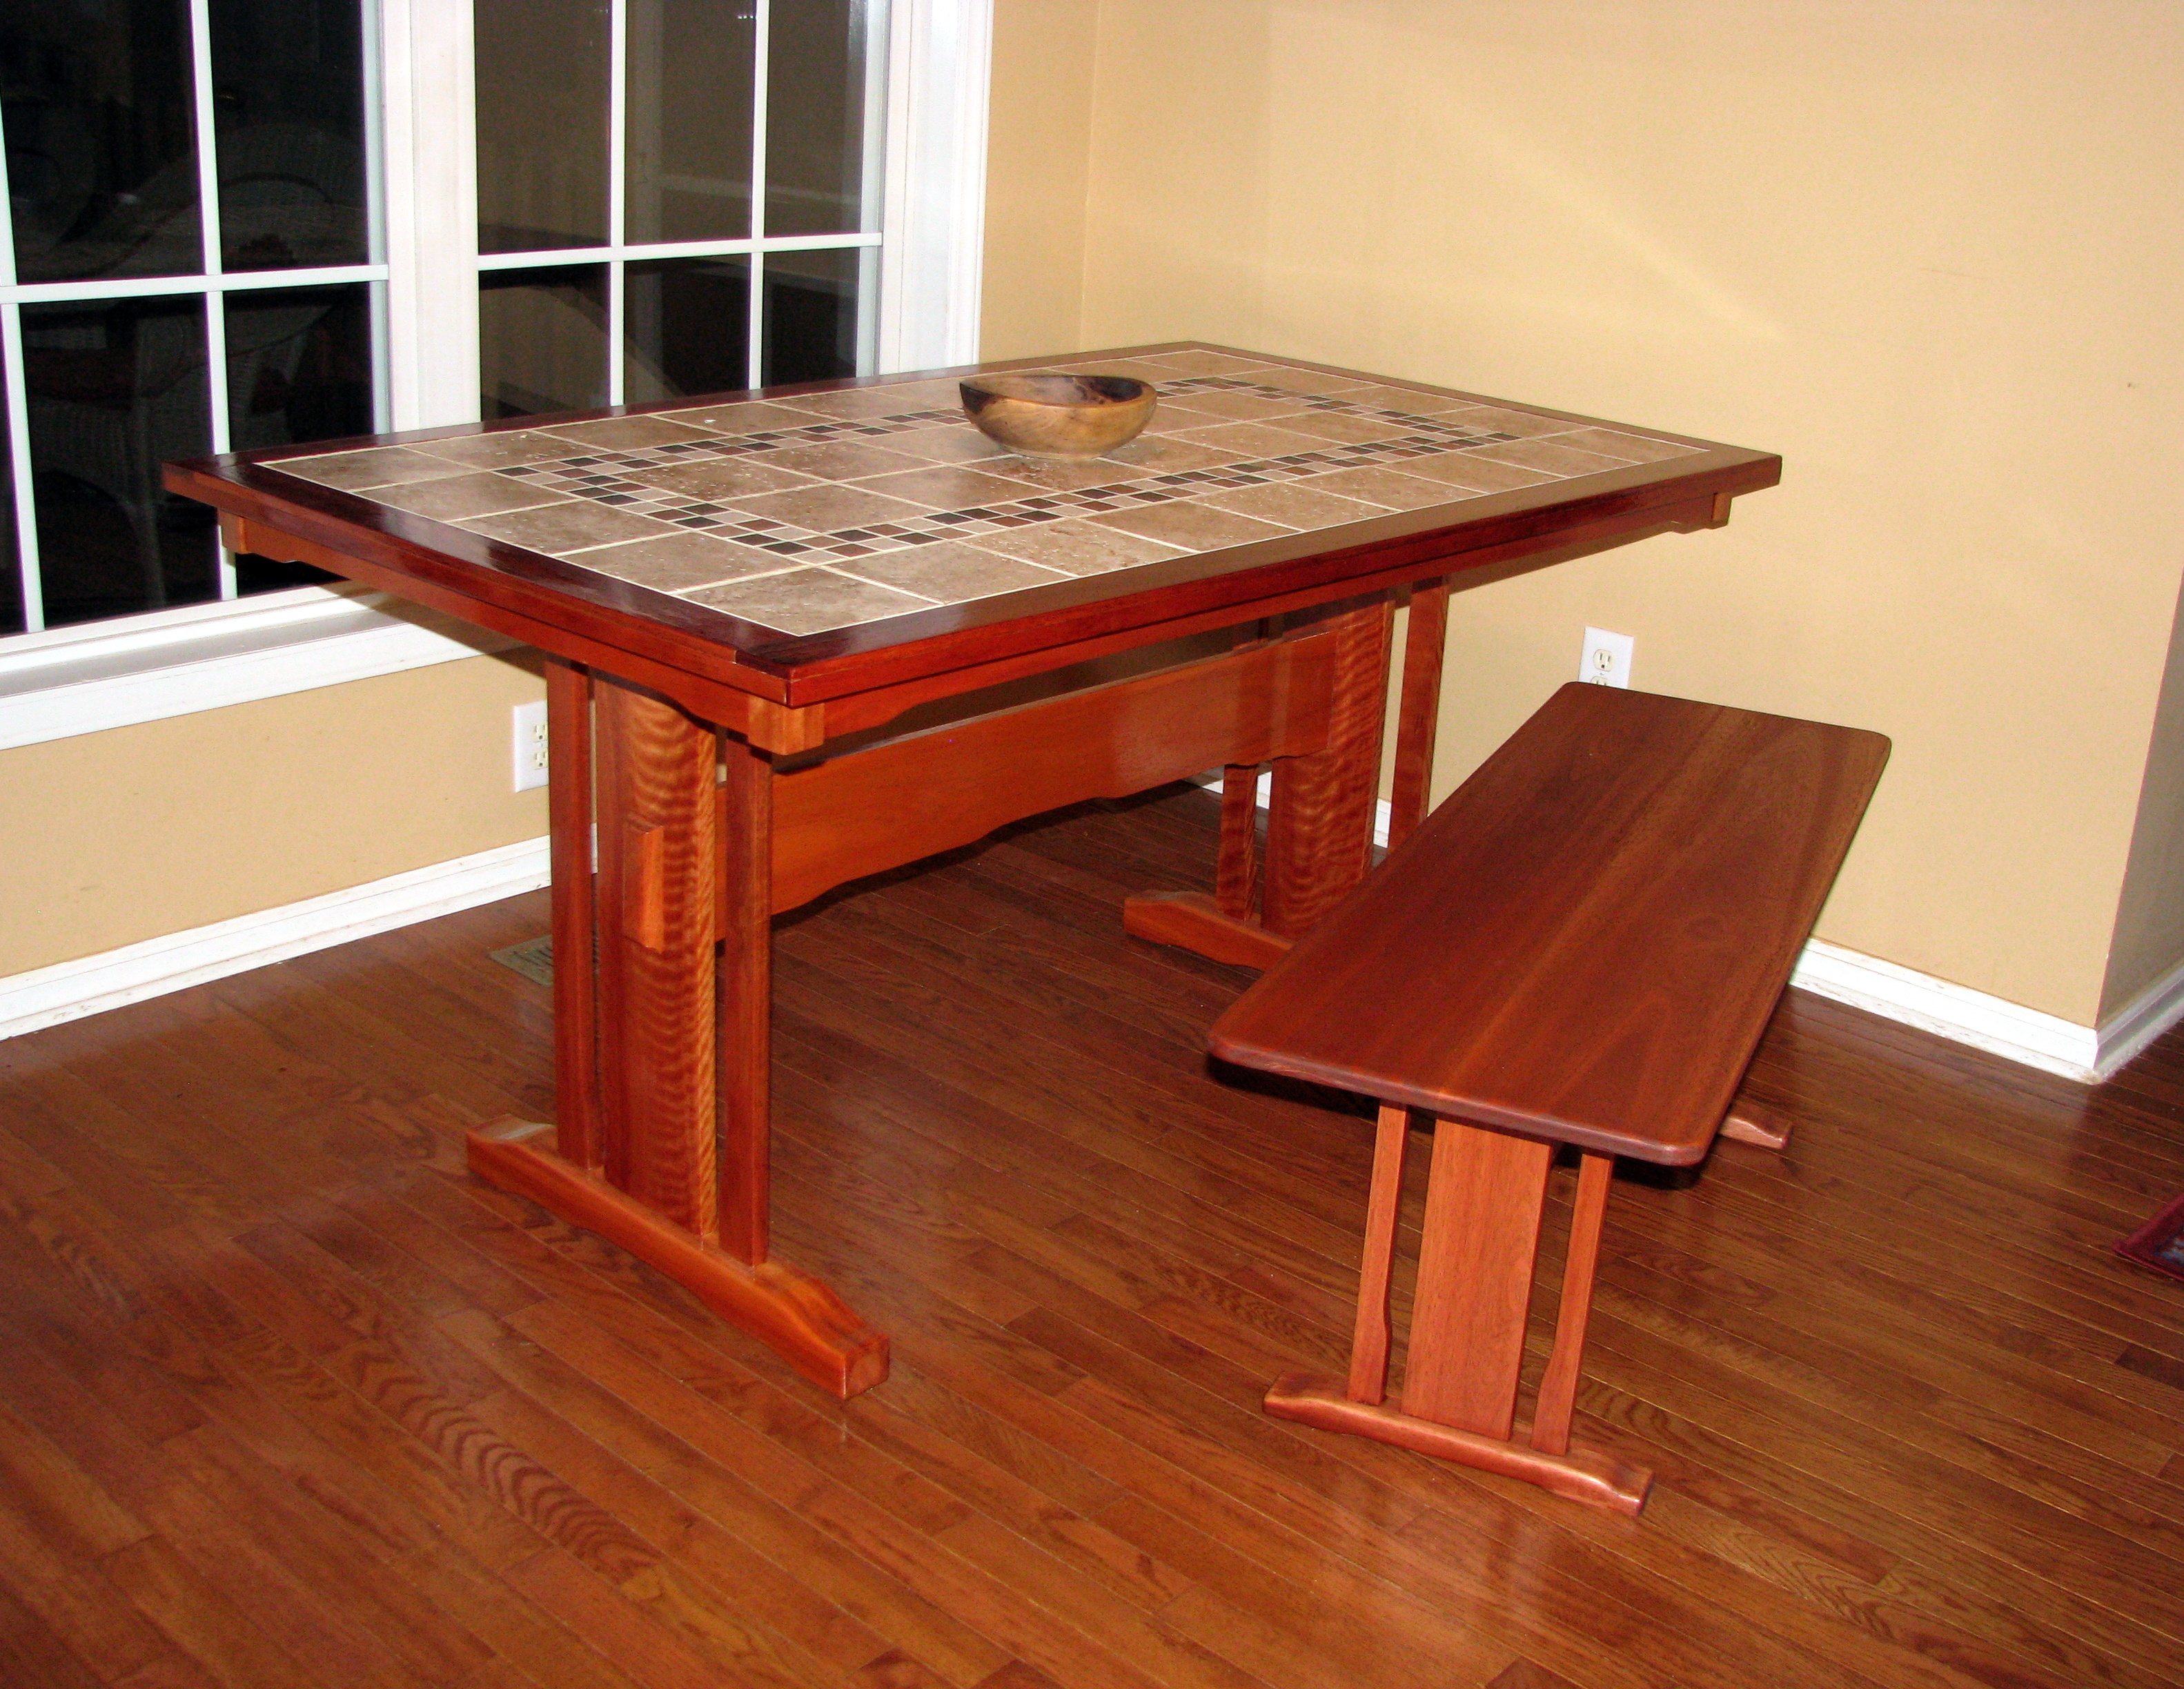 Tile-Topped Lyptus Table and Matching Bench